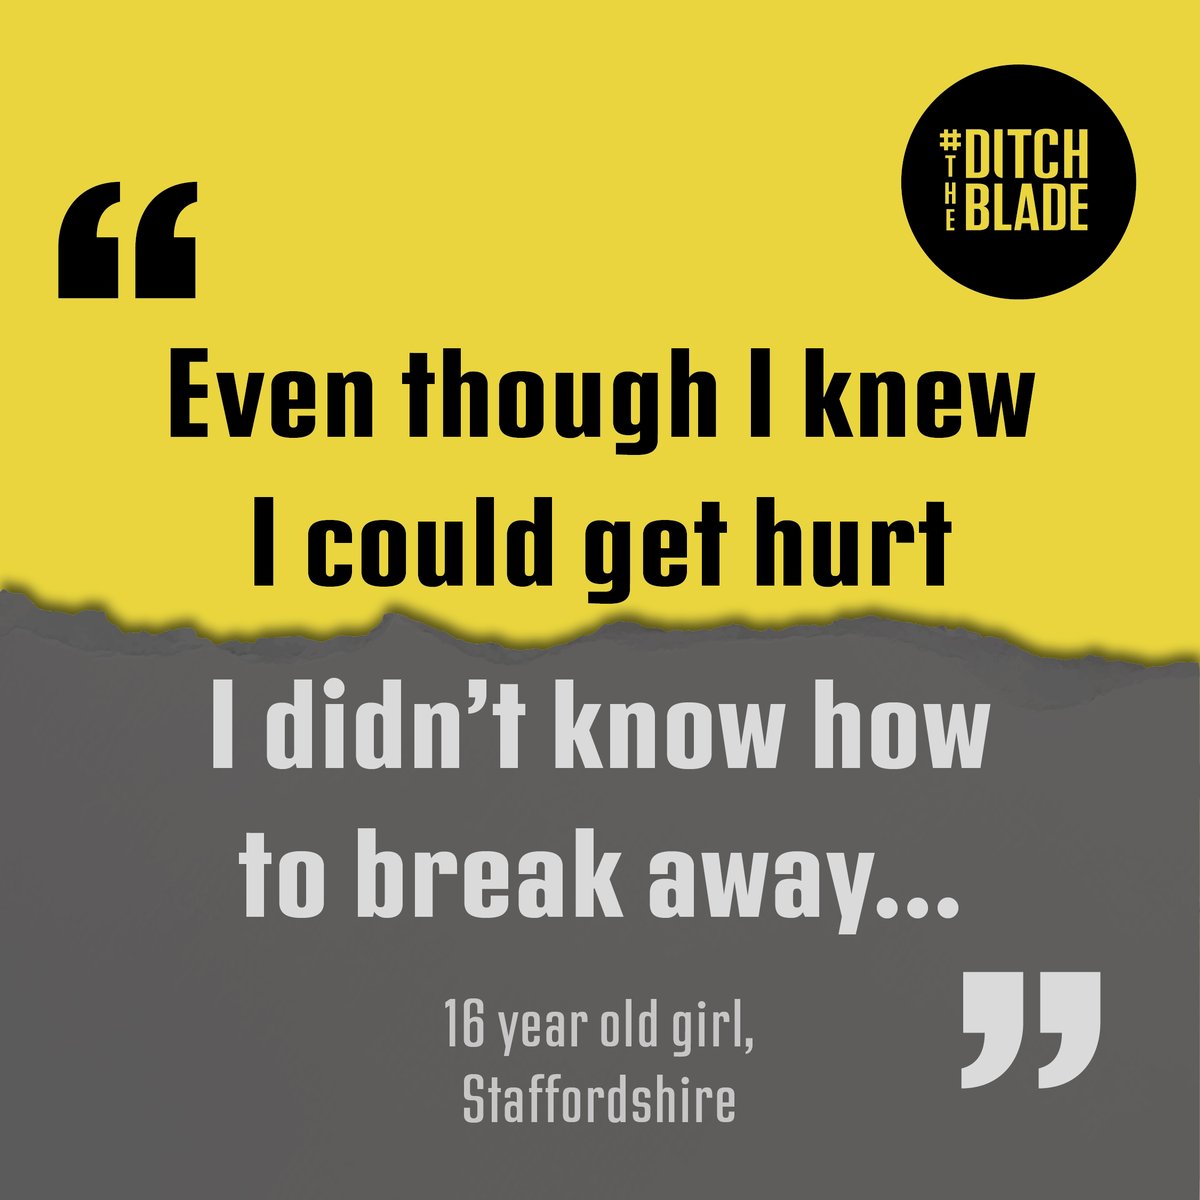 The #DitchTheBlade website has advice and links to support agencies who can give tailored confidential support and advice to young people and parents or carers. 

Take a look to find extra support to help break free from knives: orlo.uk/CO9eK